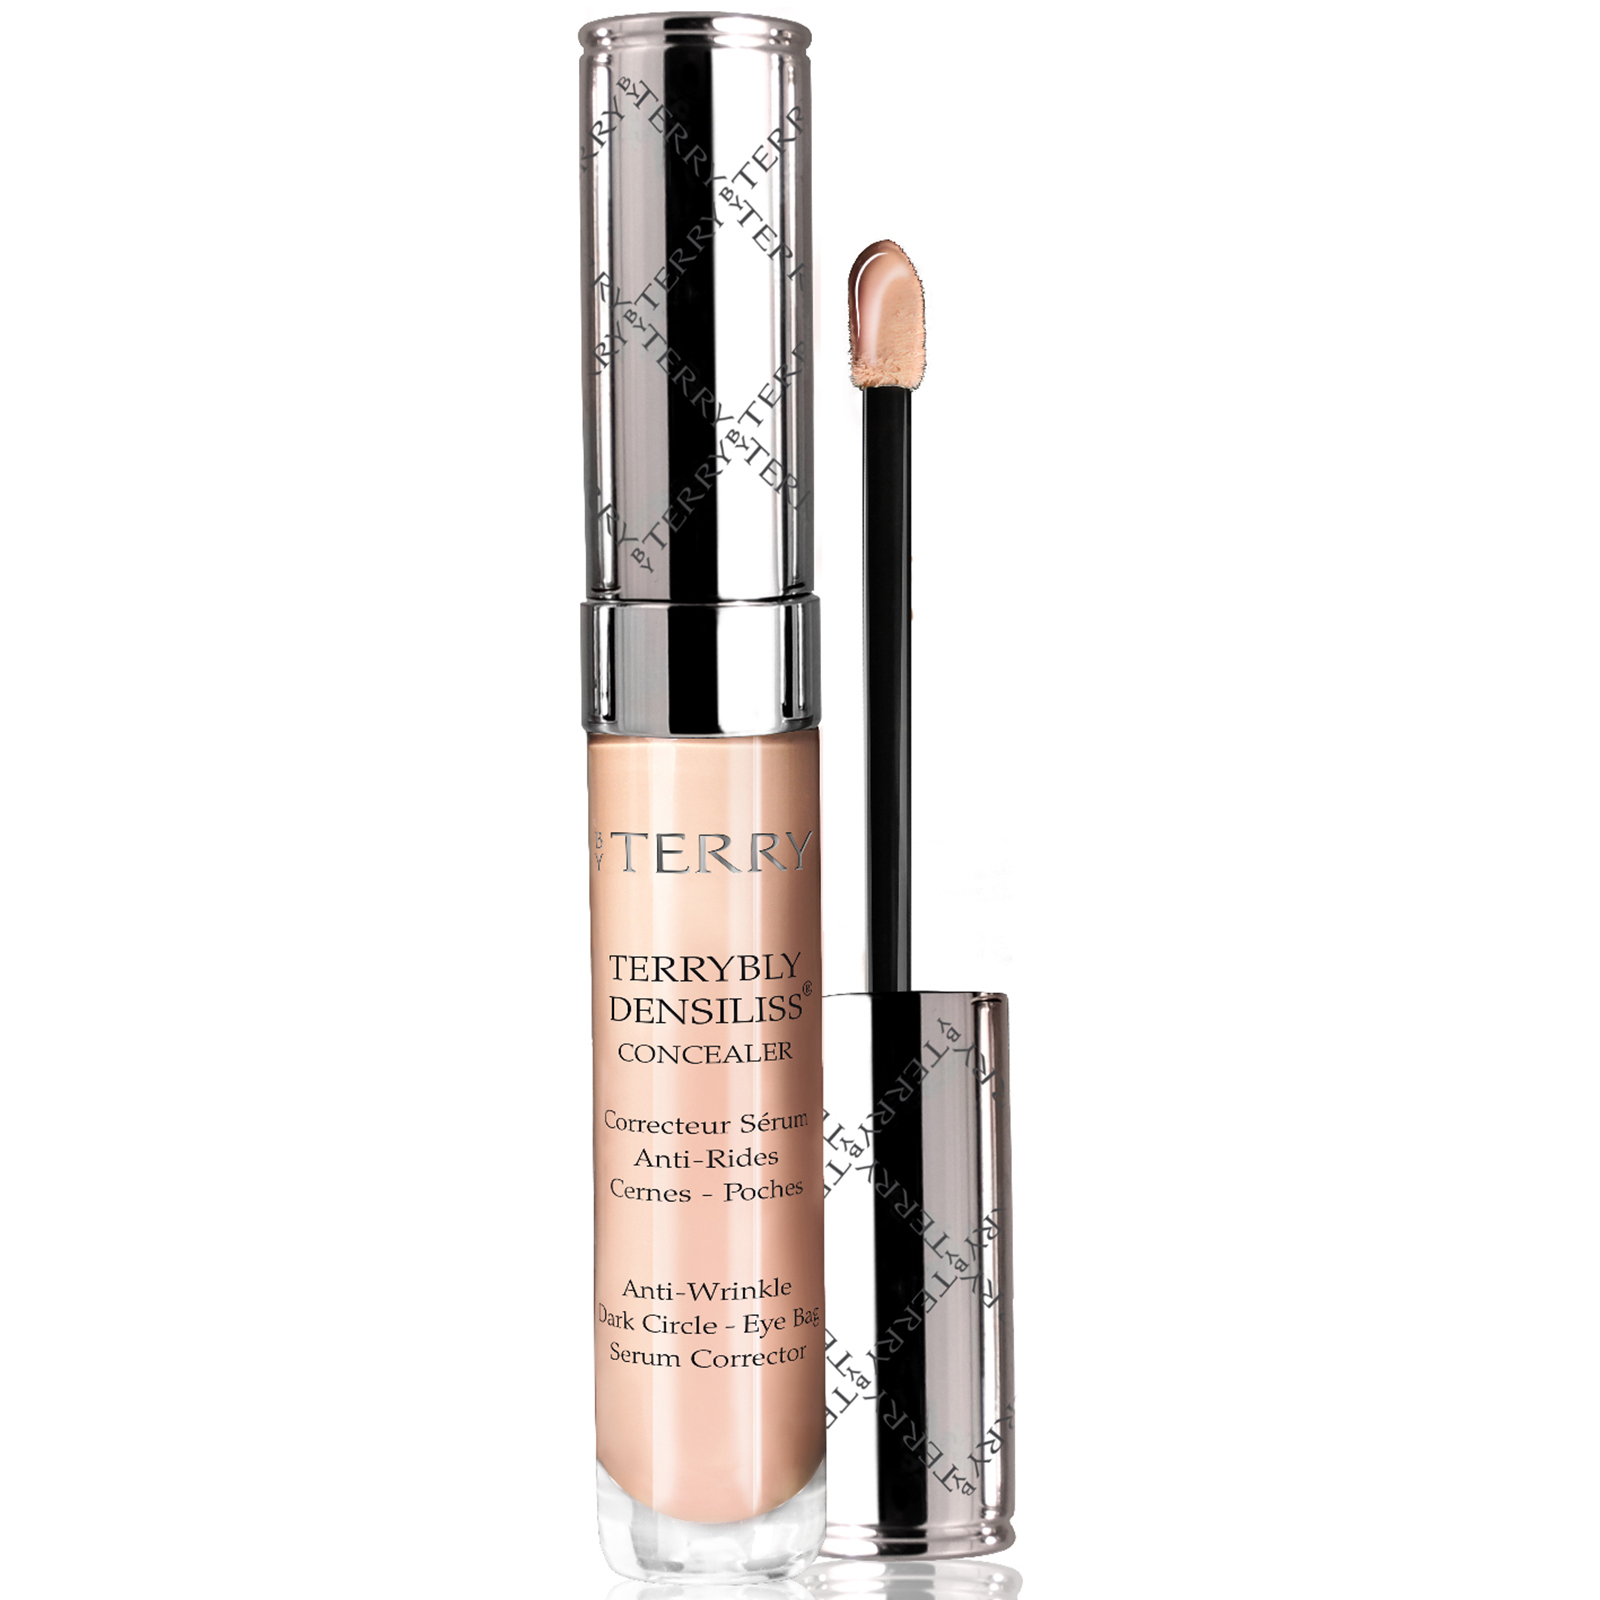 By Terry Terrybly Densiliss Concealer 7ml (Various Shades) - 3. Natural Beige